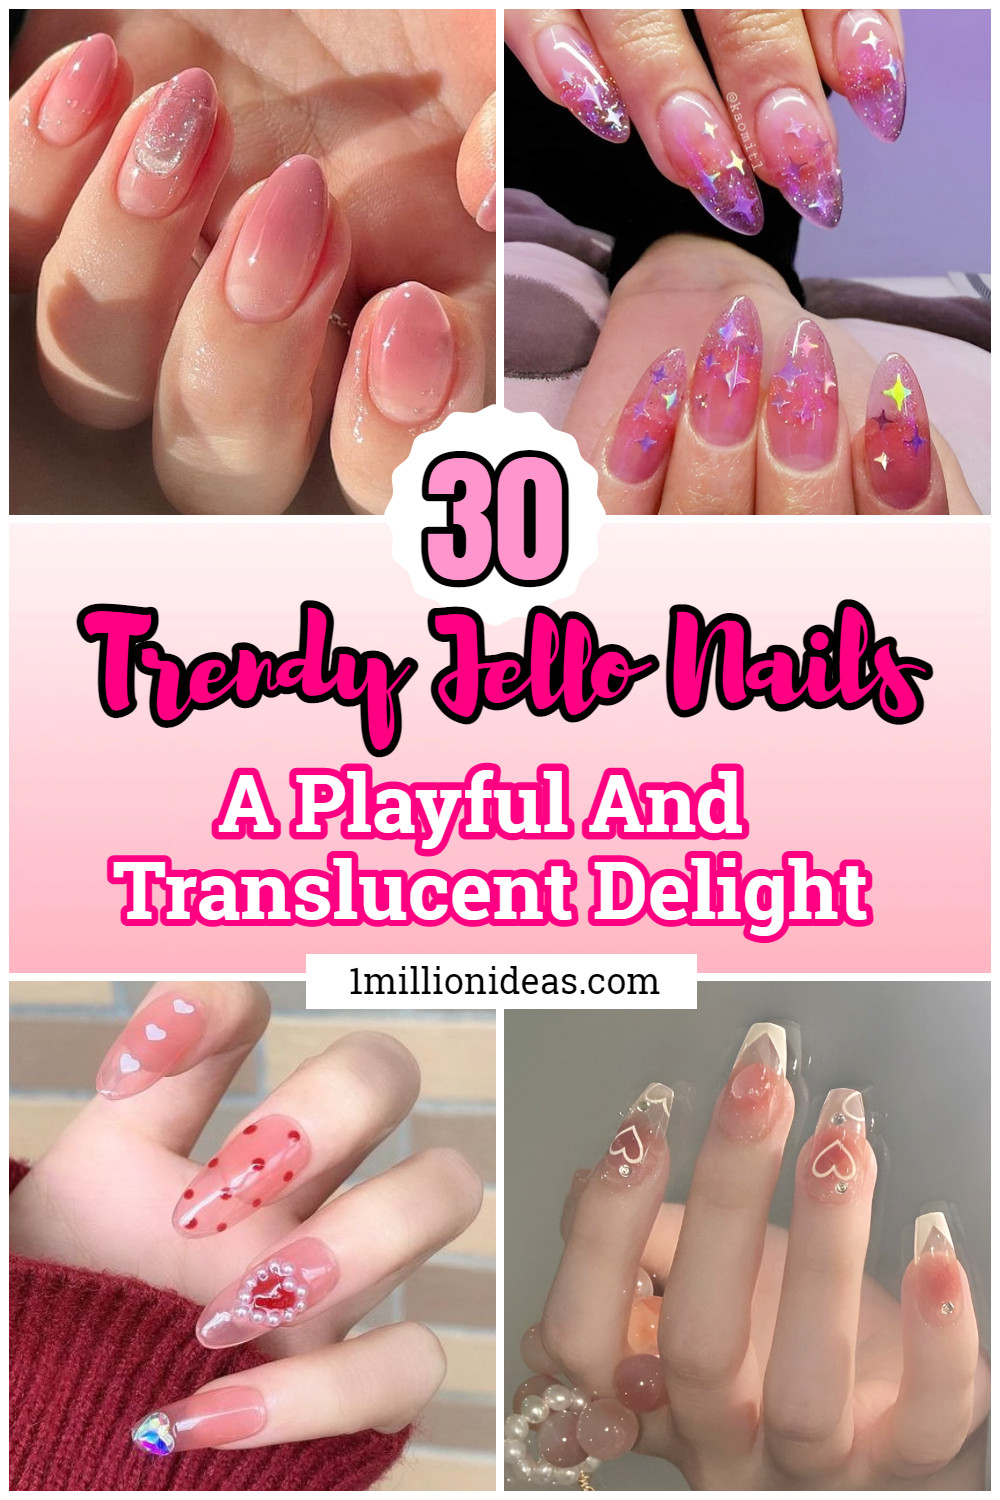 Trendy Jello Nails: A Playful And Translucent Delight - 191